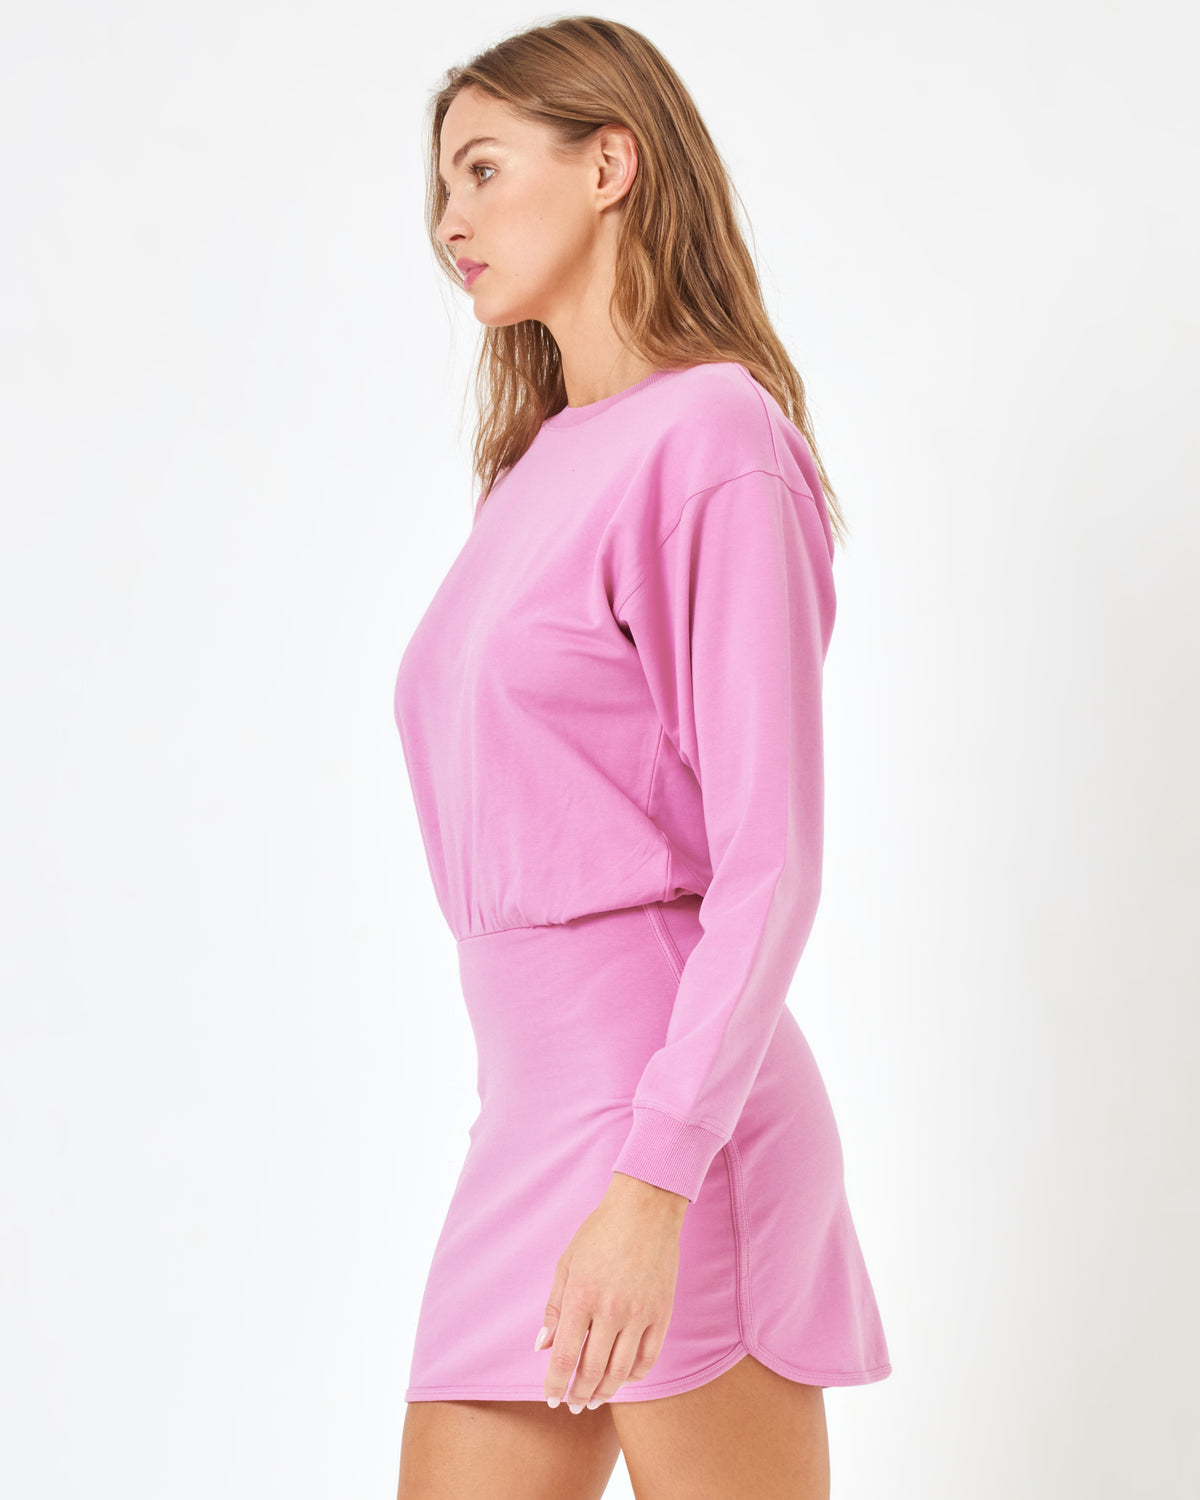 LSPACE X Anthropologie Groove Dress - Pink Lady Pink Lady | Model: Daria (size: S)